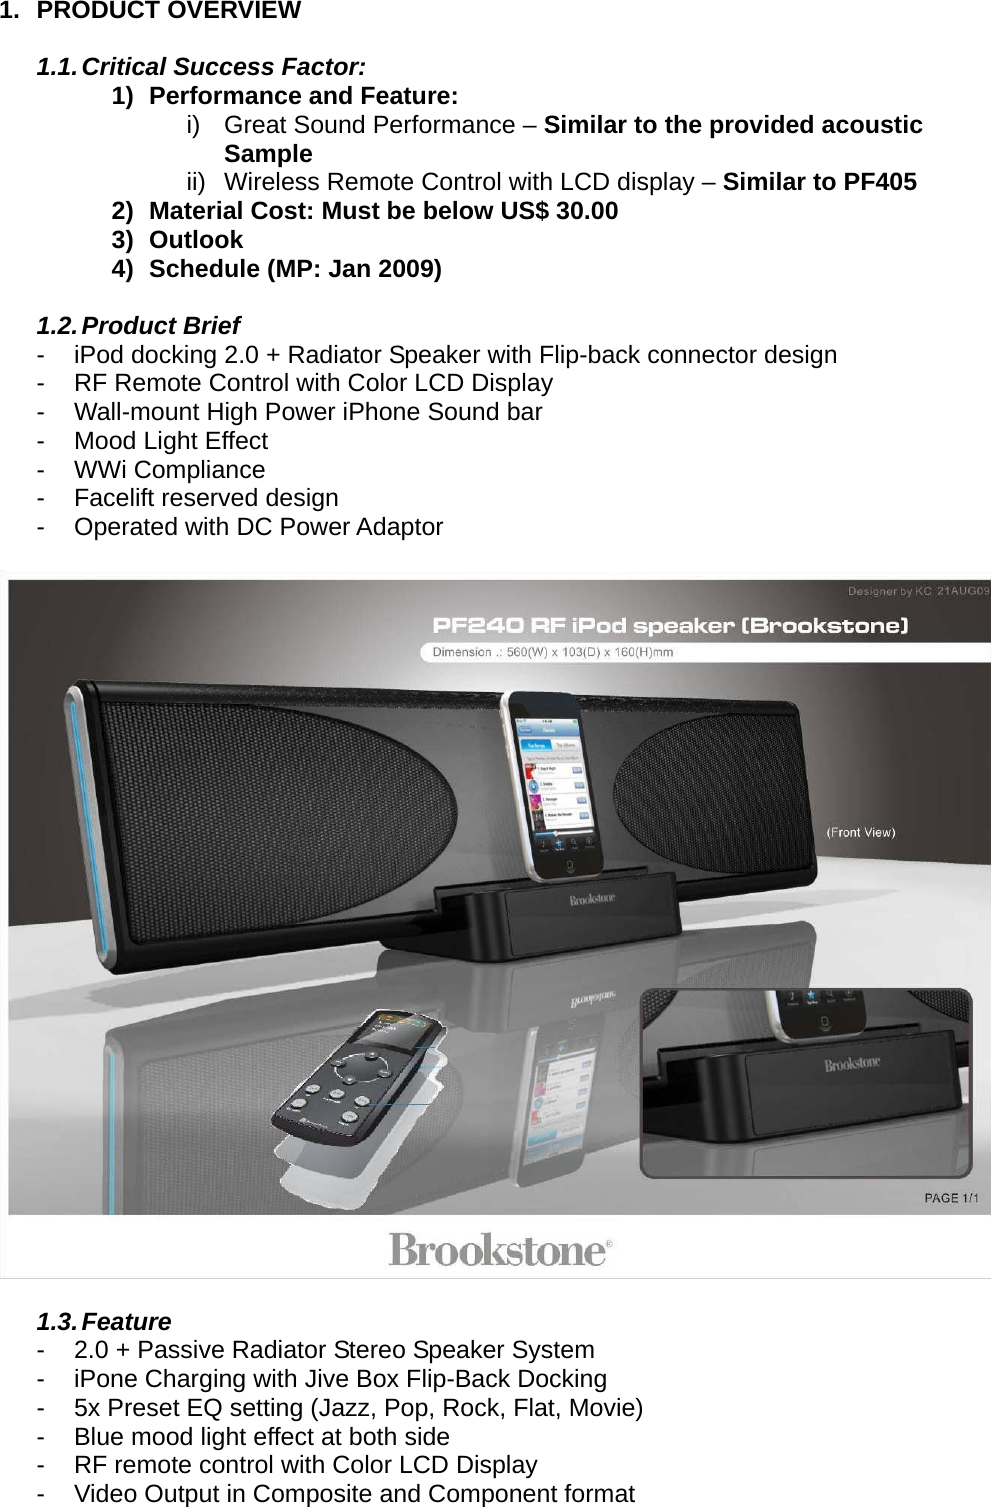 1. PRODUCT OVERVIEW  1.1. Critical Success Factor: 1)  Performance and Feature: i)  Great Sound Performance – Similar to the provided acoustic Sample ii)  Wireless Remote Control with LCD display – Similar to PF405 2)  Material Cost: Must be below US$ 30.00 3) Outlook 4)  Schedule (MP: Jan 2009)  1.2. Product  Brief -  iPod docking 2.0 + Radiator Speaker with Flip-back connector design -  RF Remote Control with Color LCD Display -  Wall-mount High Power iPhone Sound bar -  Mood Light Effect - WWi Compliance -  Facelift reserved design - Operated with DC Power Adaptor    1.3. Feature -  2.0 + Passive Radiator Stereo Speaker System -  iPone Charging with Jive Box Flip-Back Docking -  5x Preset EQ setting (Jazz, Pop, Rock, Flat, Movie) -  Blue mood light effect at both side -  RF remote control with Color LCD Display -  Video Output in Composite and Component format 